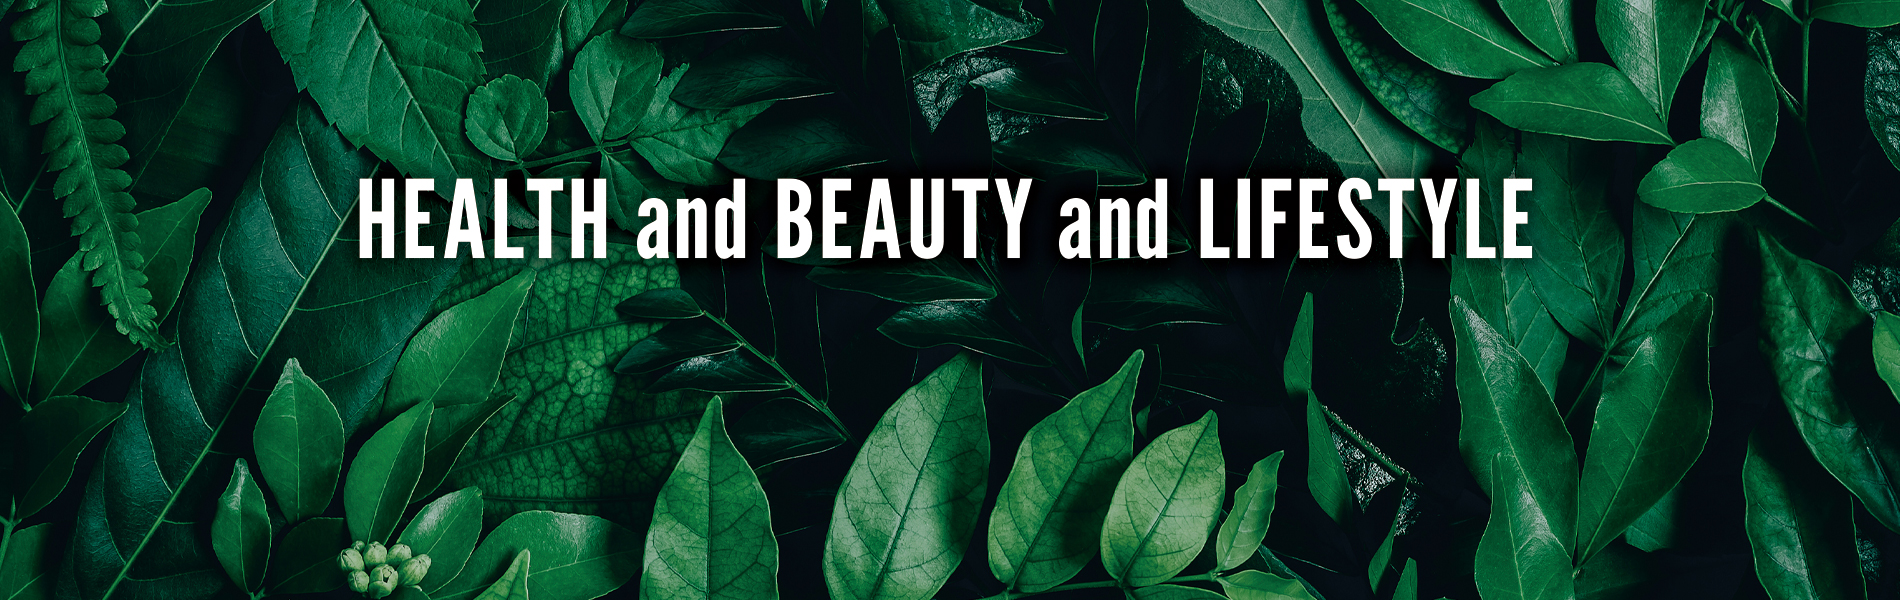 Health and Beauty and Lifestyle